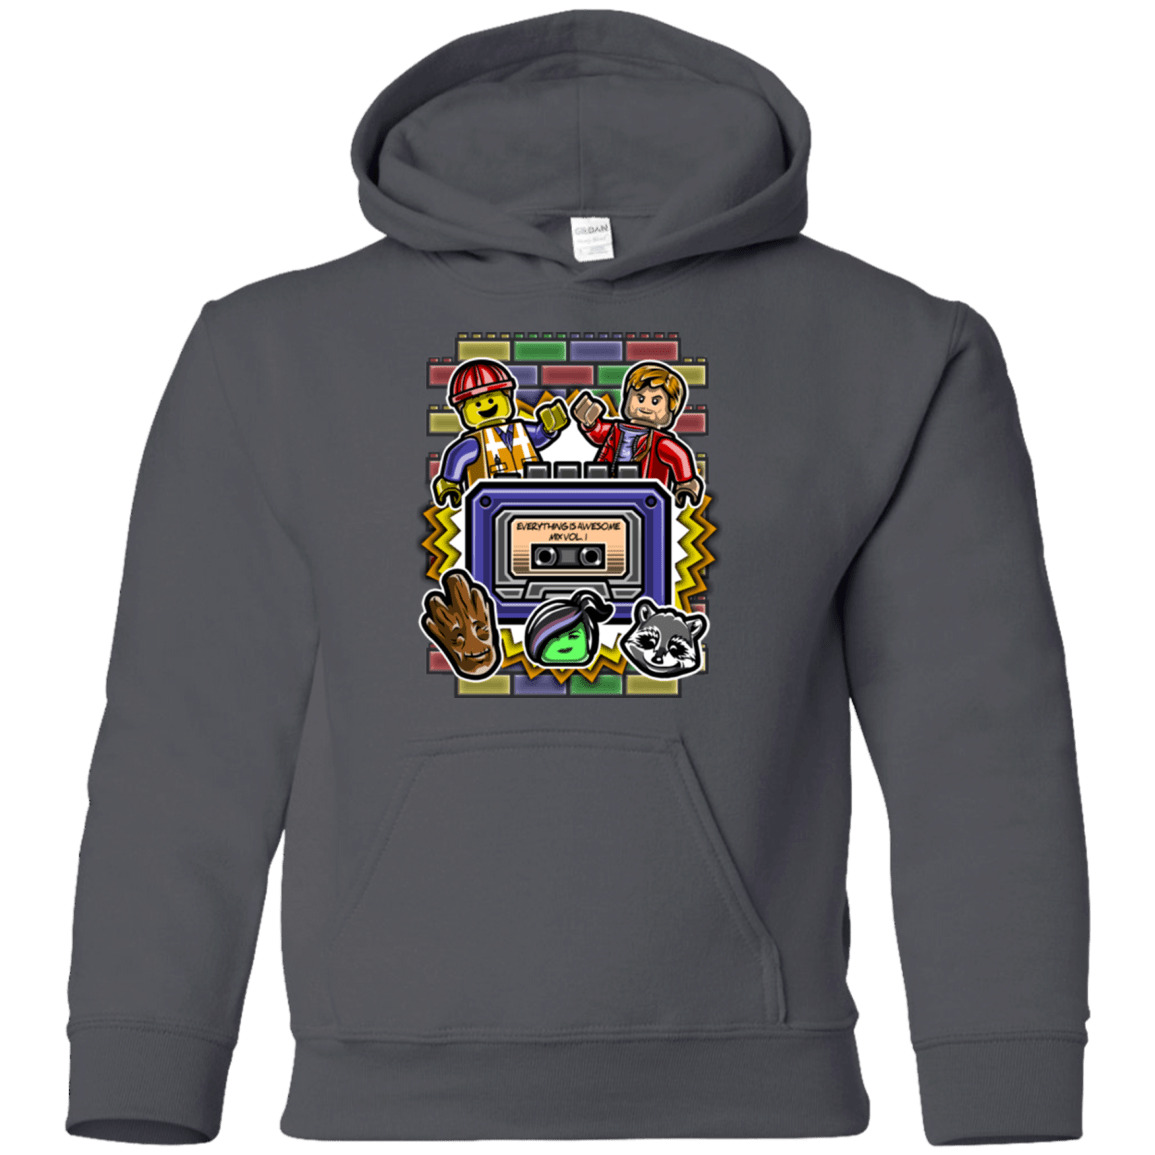 Sweatshirts Charcoal / YS Everything is awesome mix Youth Hoodie